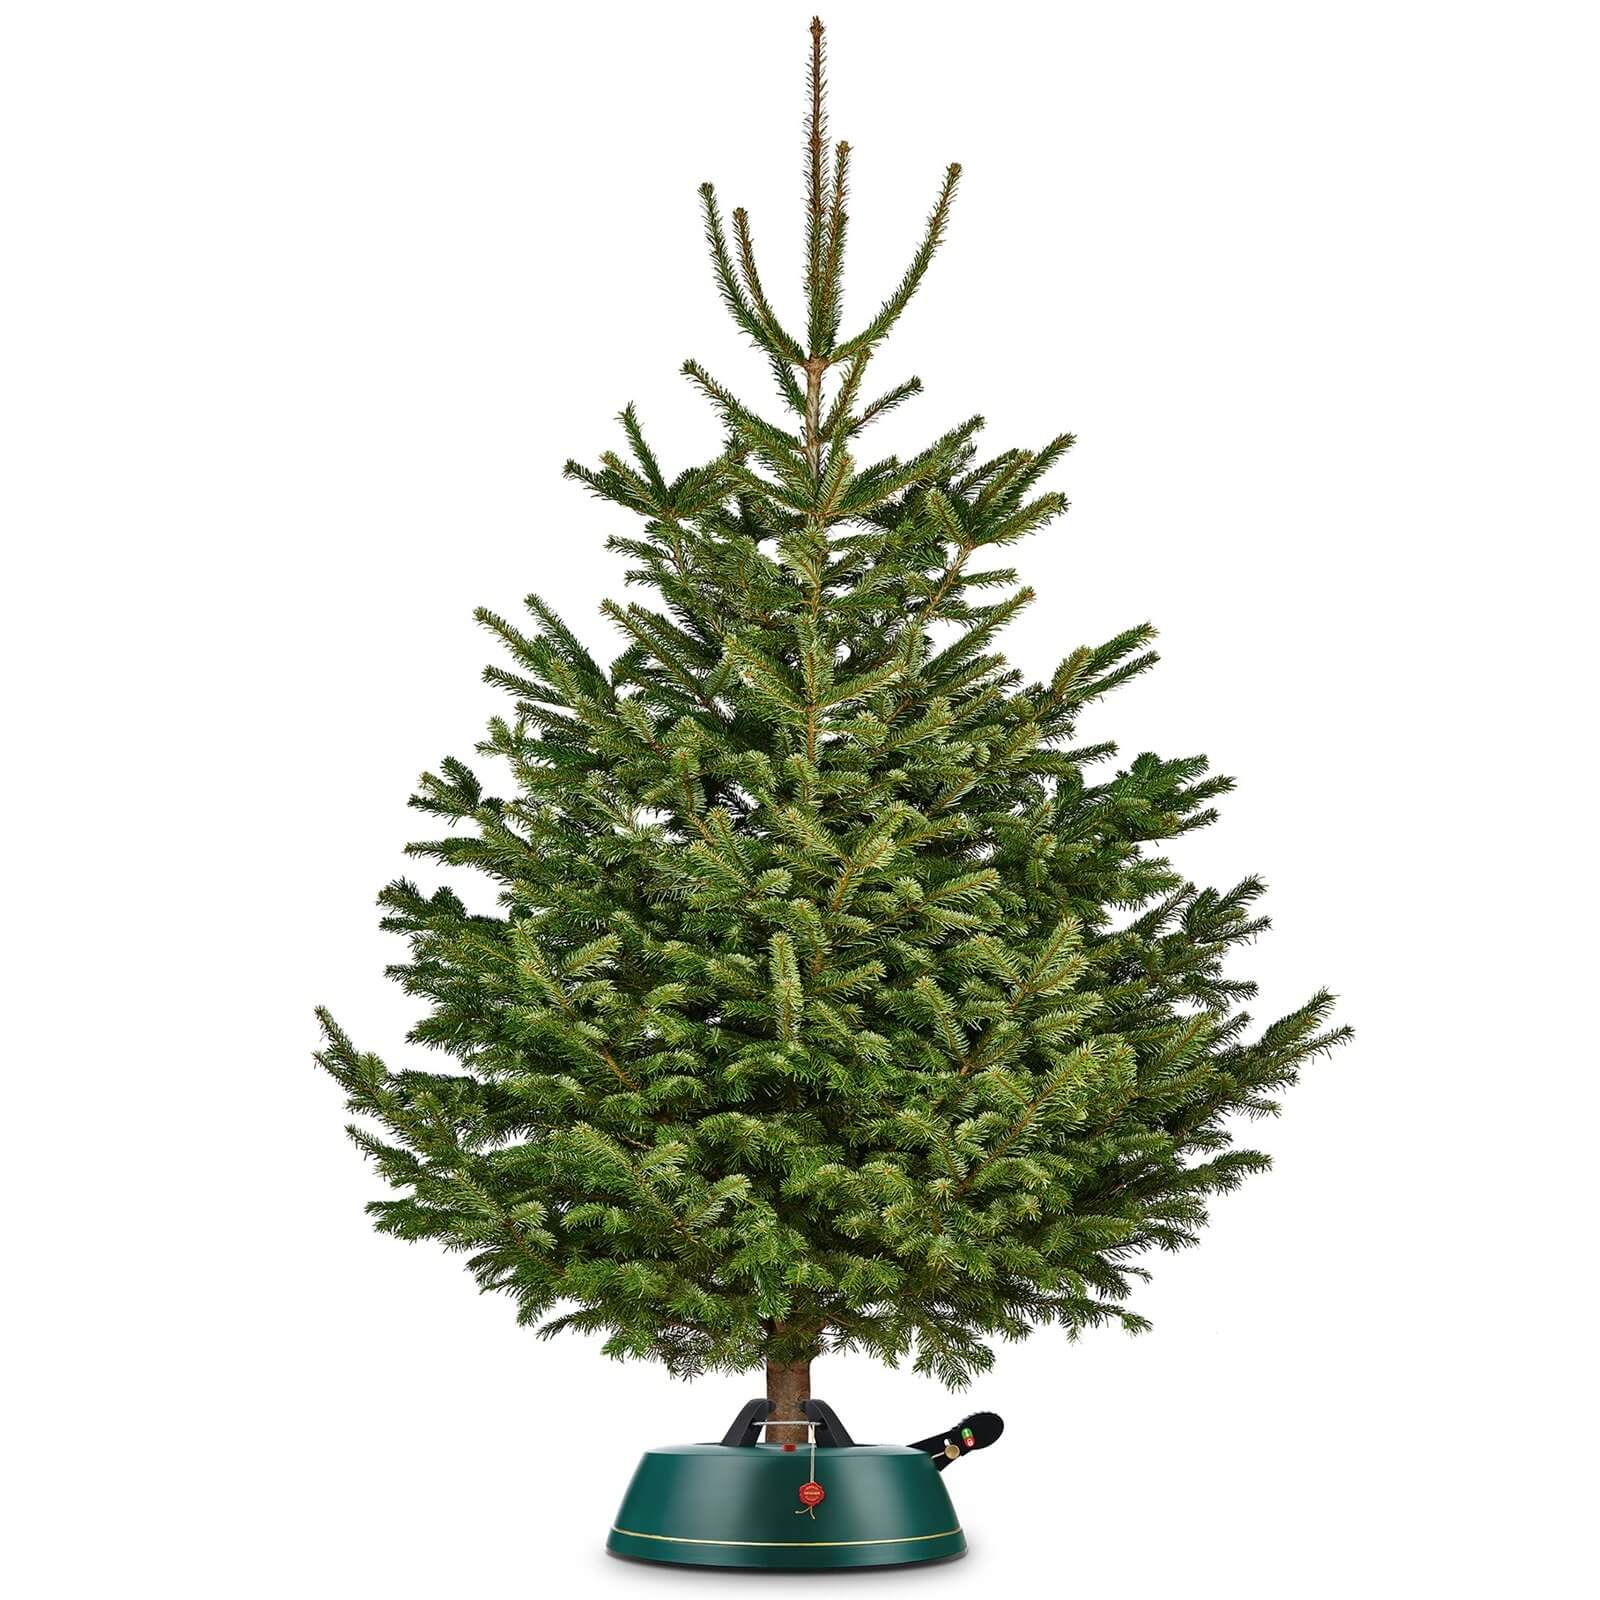 Krinner Classic Standard Christmas Tree Stand - 13 Inch